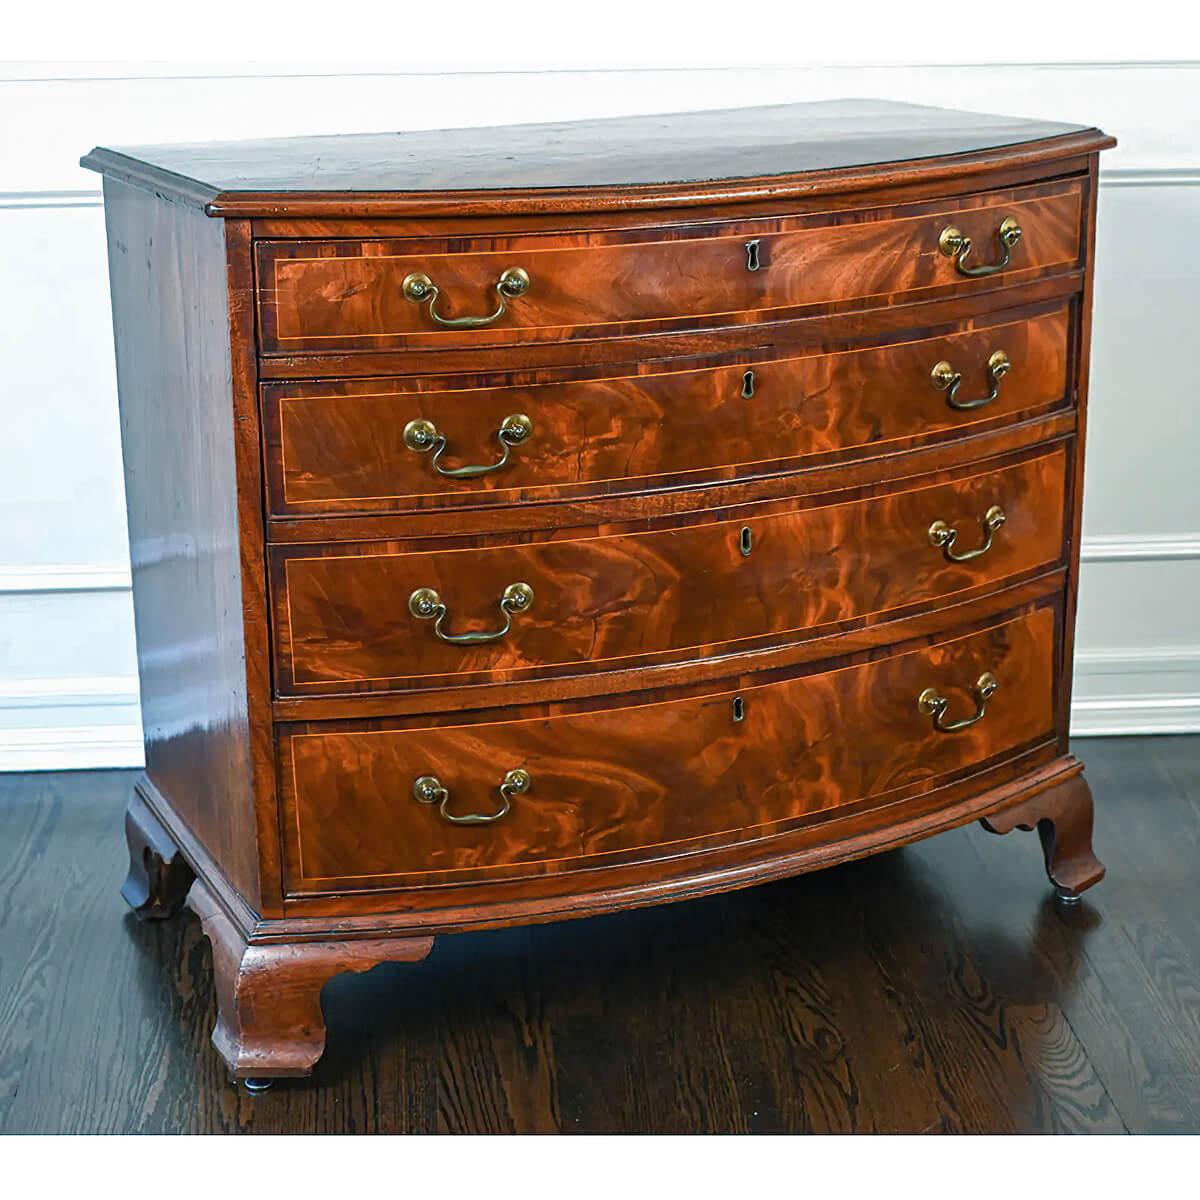 A fine George III mahogany bowfront chest of drawers. This 18th century English dresser has four graduated, with crotch mahogany and satinwood line inlaid cross banding, with the antique brass bail handles raised on fine ogee bracket feet.